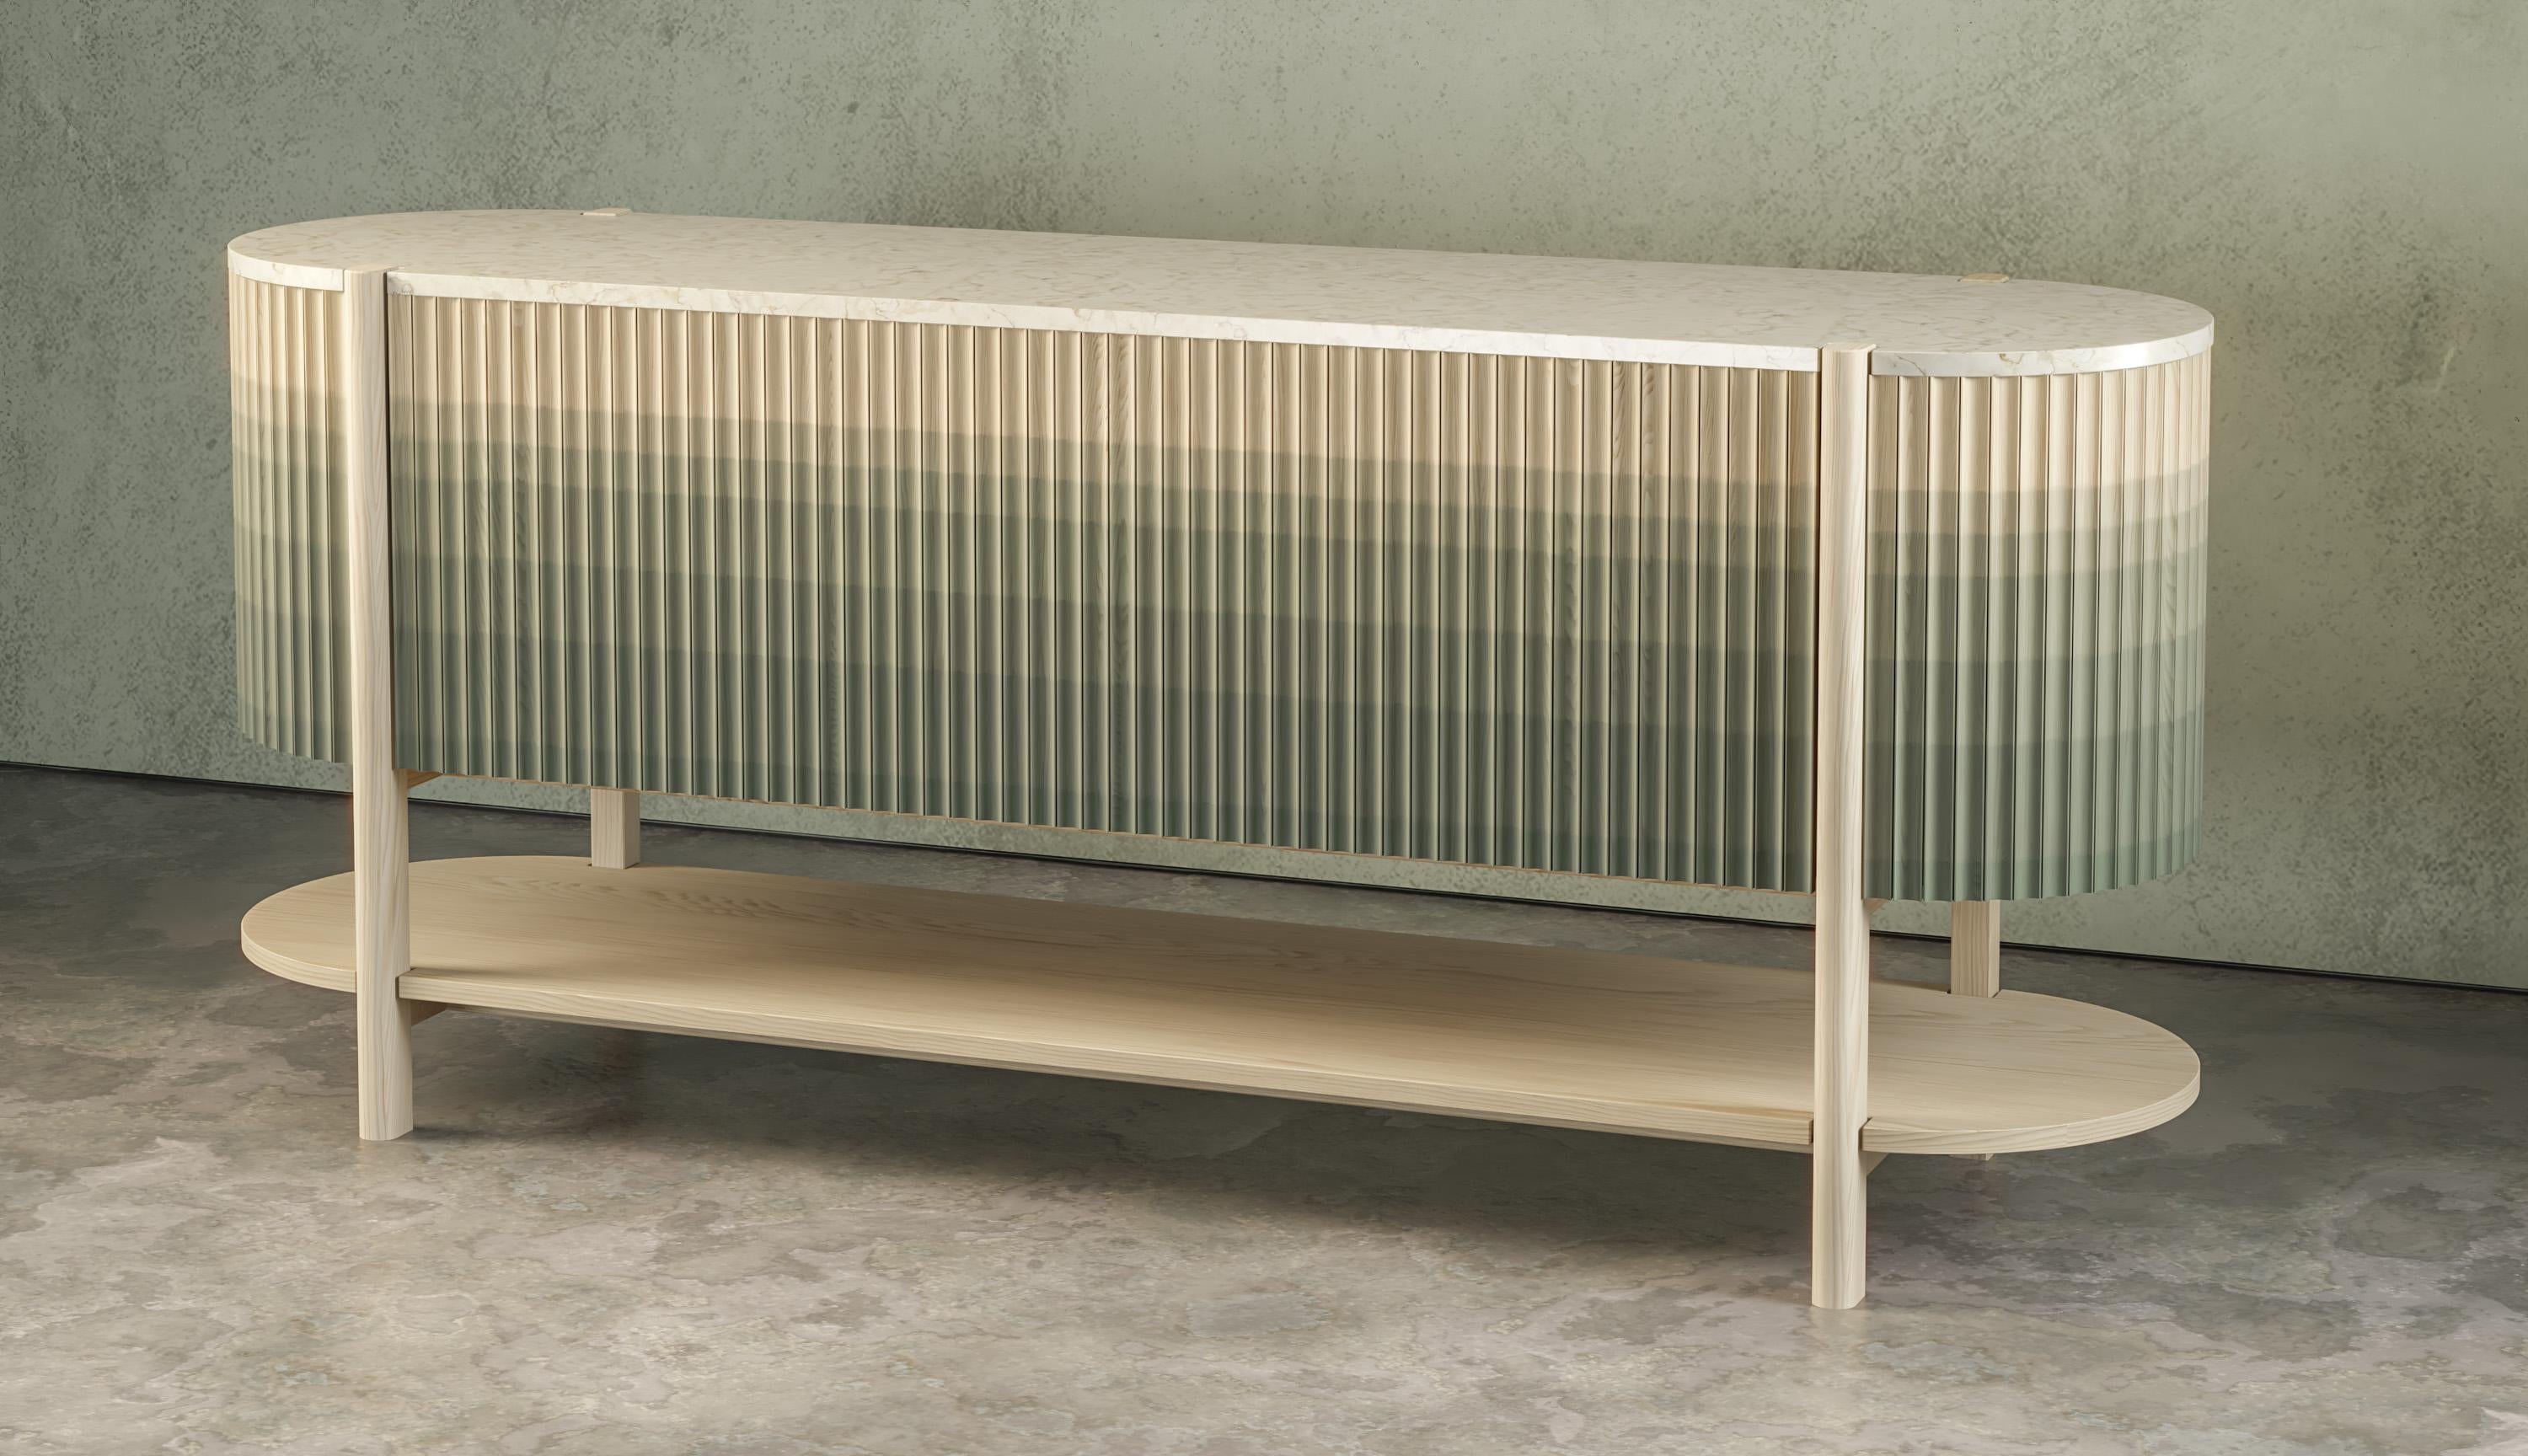 Pilar credenza by Indo Made
One of a kind
Dimensions: D 182.9, W 45.7, H76.2cm 
Materials: Maple, Crema Marfil Marble top.
Finish: Celadon green ombre.

Different dimensions available. Also available in other materials (Oak/Maple; Hardwood or